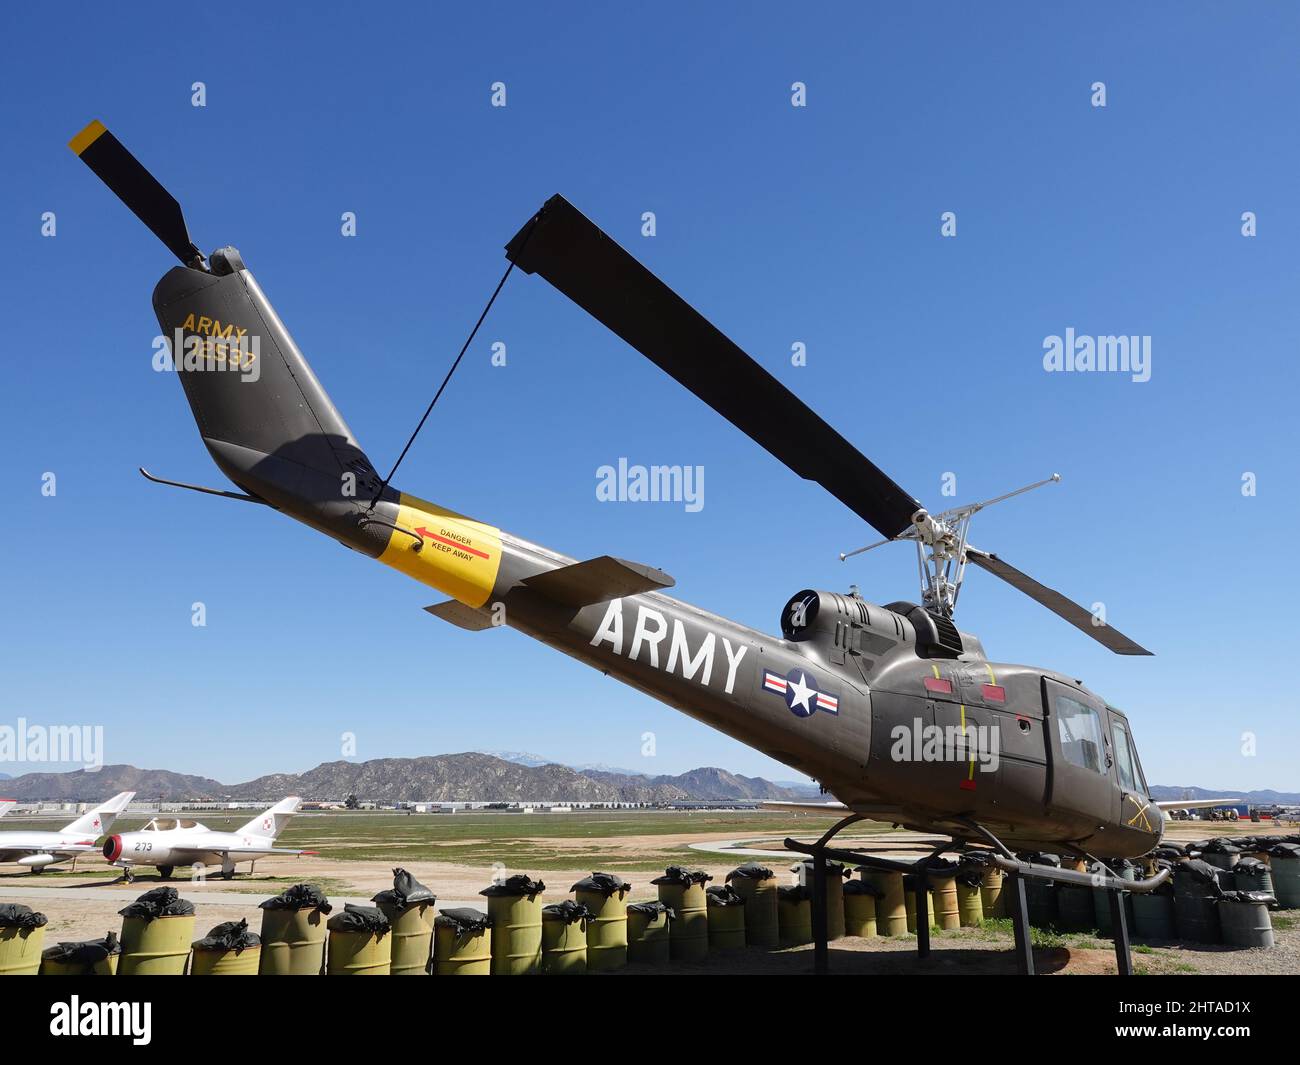 Moreno Valley, California, USA - February 26, 2022: Tail view of UH-1B Iroquios Helicopter Stock Photo